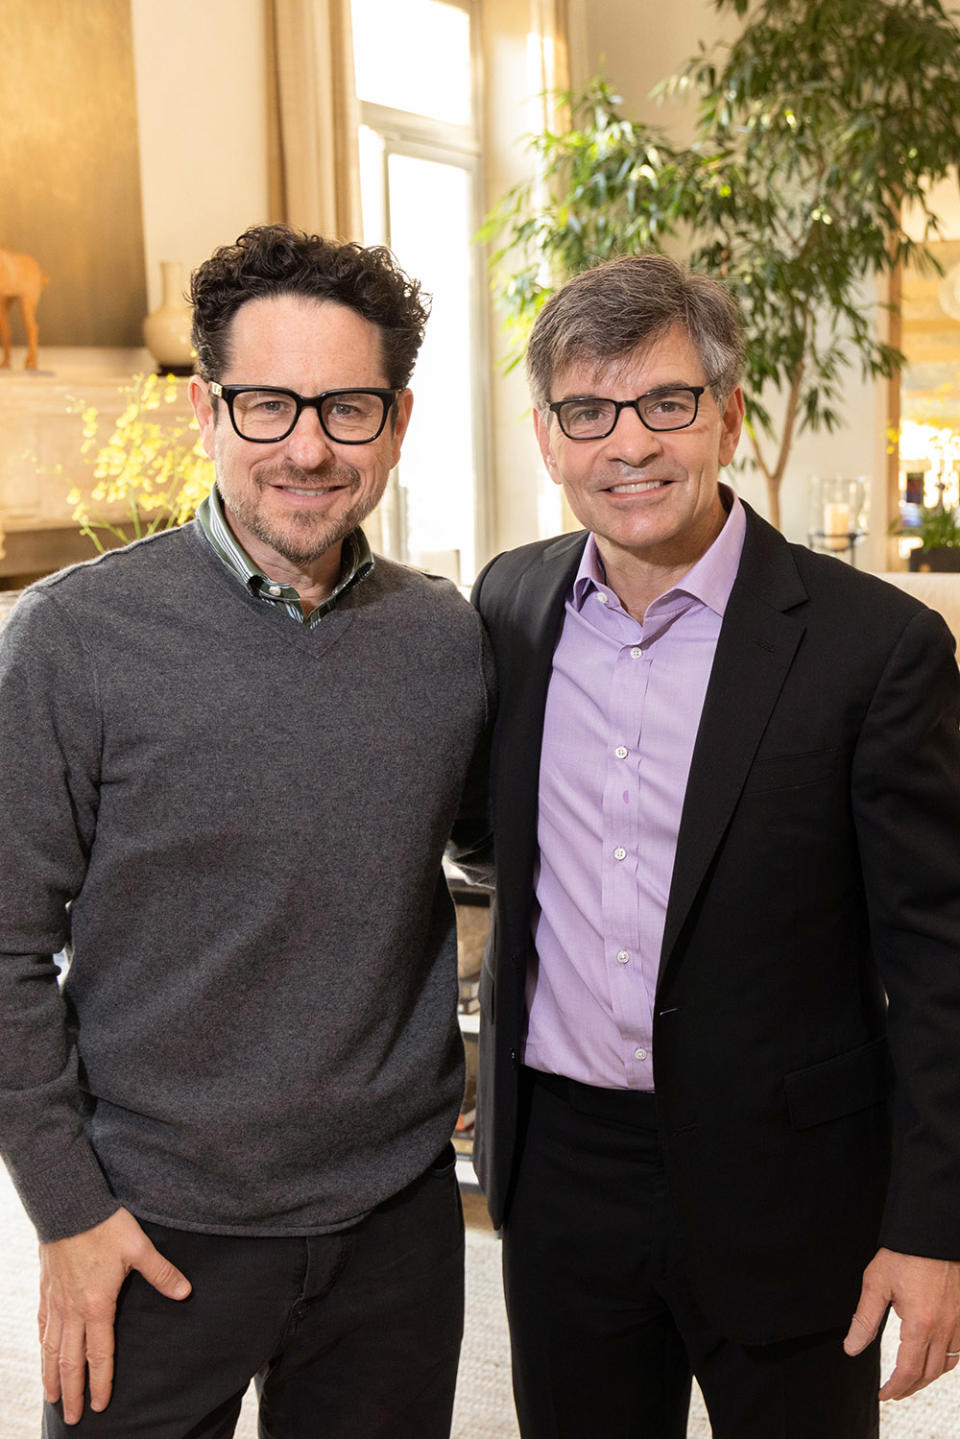 J.J. Abrams and George Stephanopoulos attend as George Stephanopoulos celebrates his upcoming book The Situation Room with friends at a book party in Los Angeles, CA on Friday, April 19, 2024